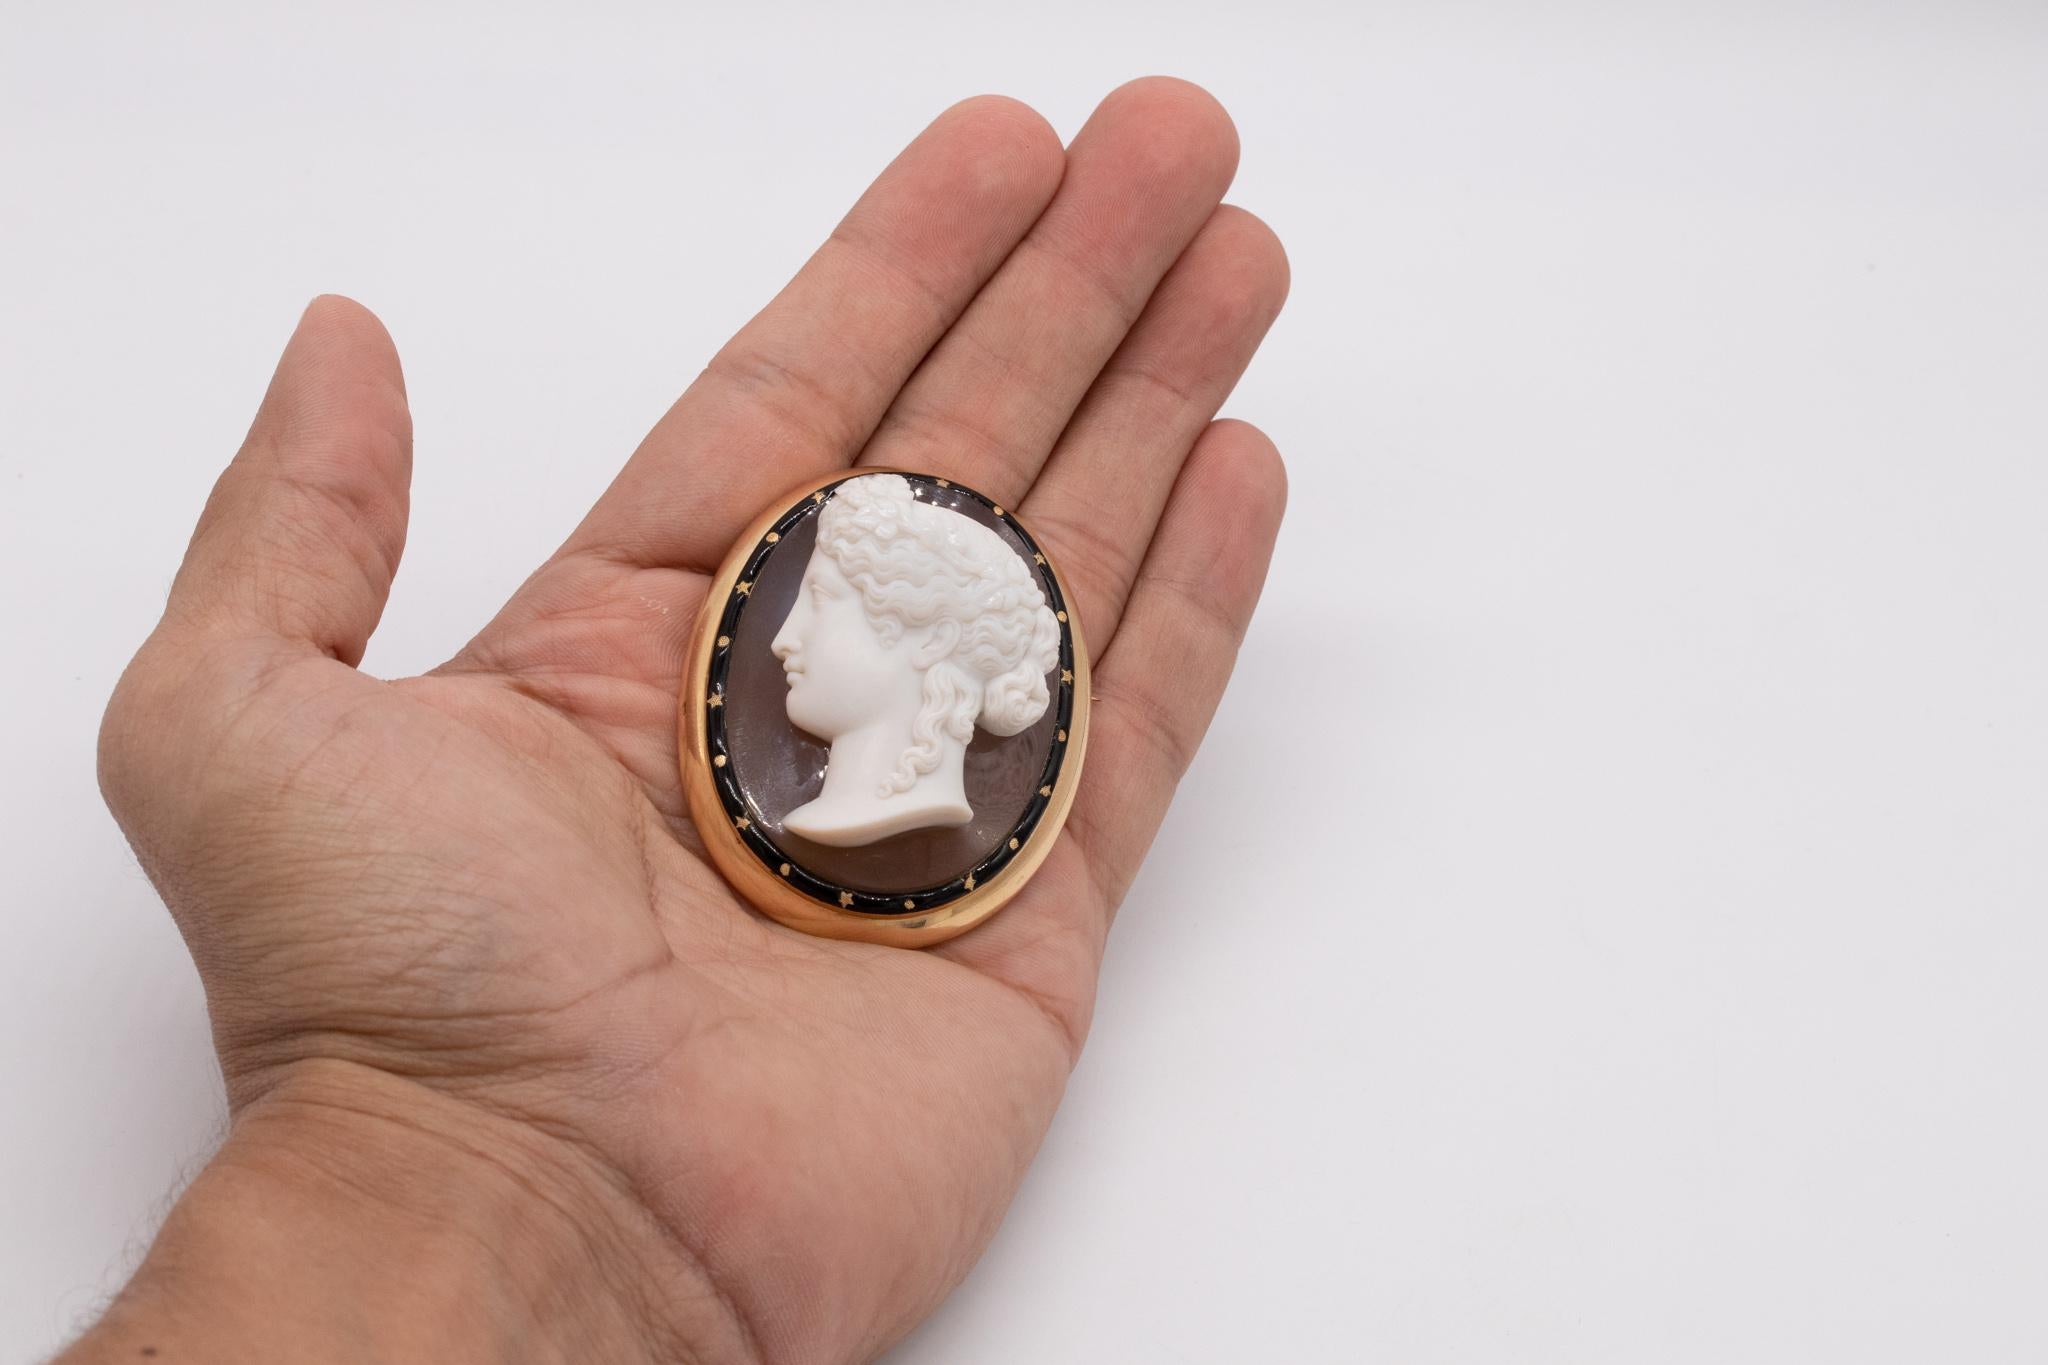  An Austrian carved agate cameo of Heba.

This piece feature a fabulous three-dimensional cameo piece, carved from a two layered natural agate, with gradations of colors; from translucent orange brown to frosted white.

The quality of the carving is